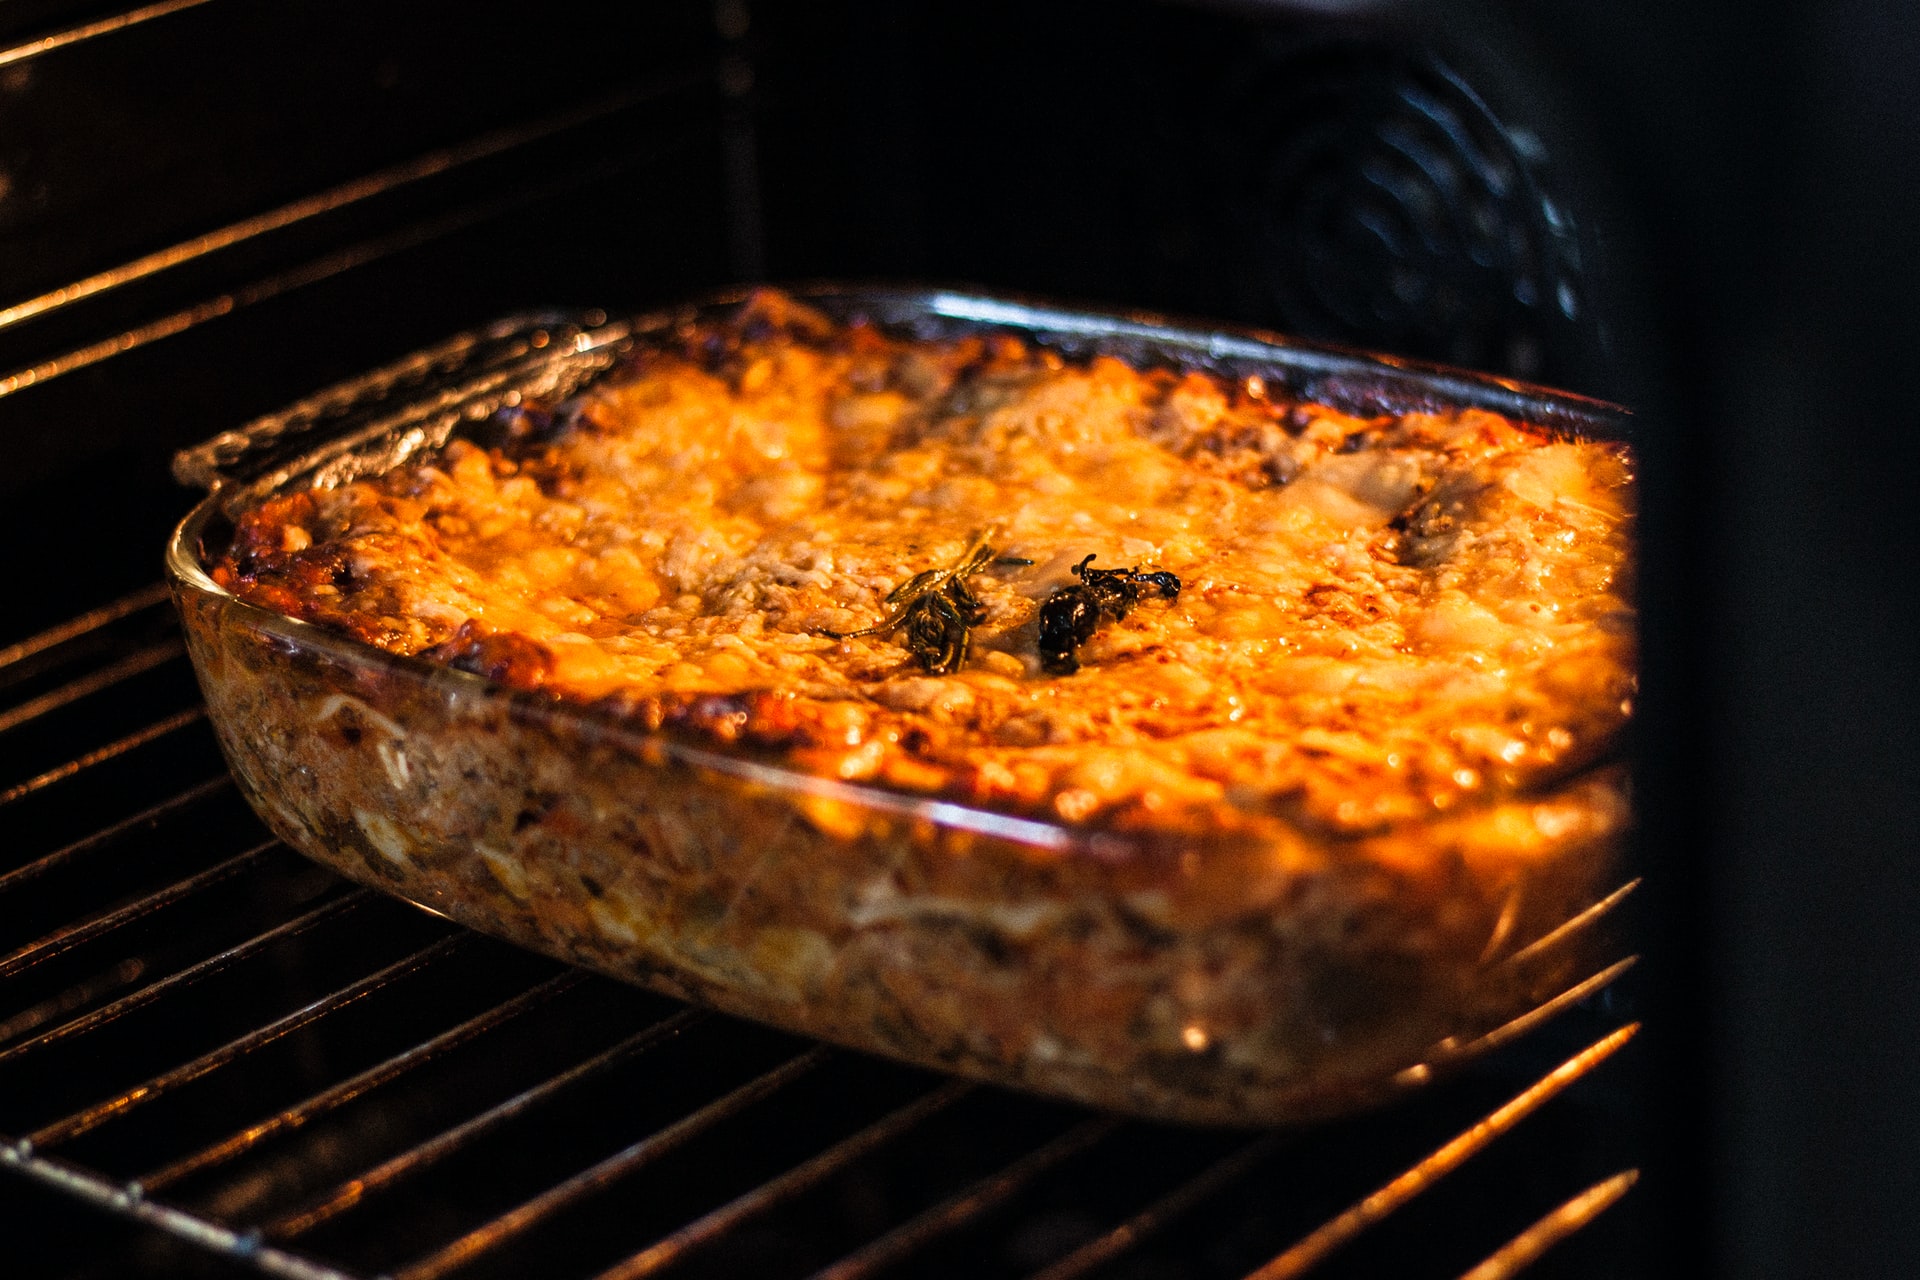 https://www.themanual.com/wp-content/uploads/sites/9/2022/06/baked-lasagna-glass-dish-oven.jpg?fit=800%2C800&p=1